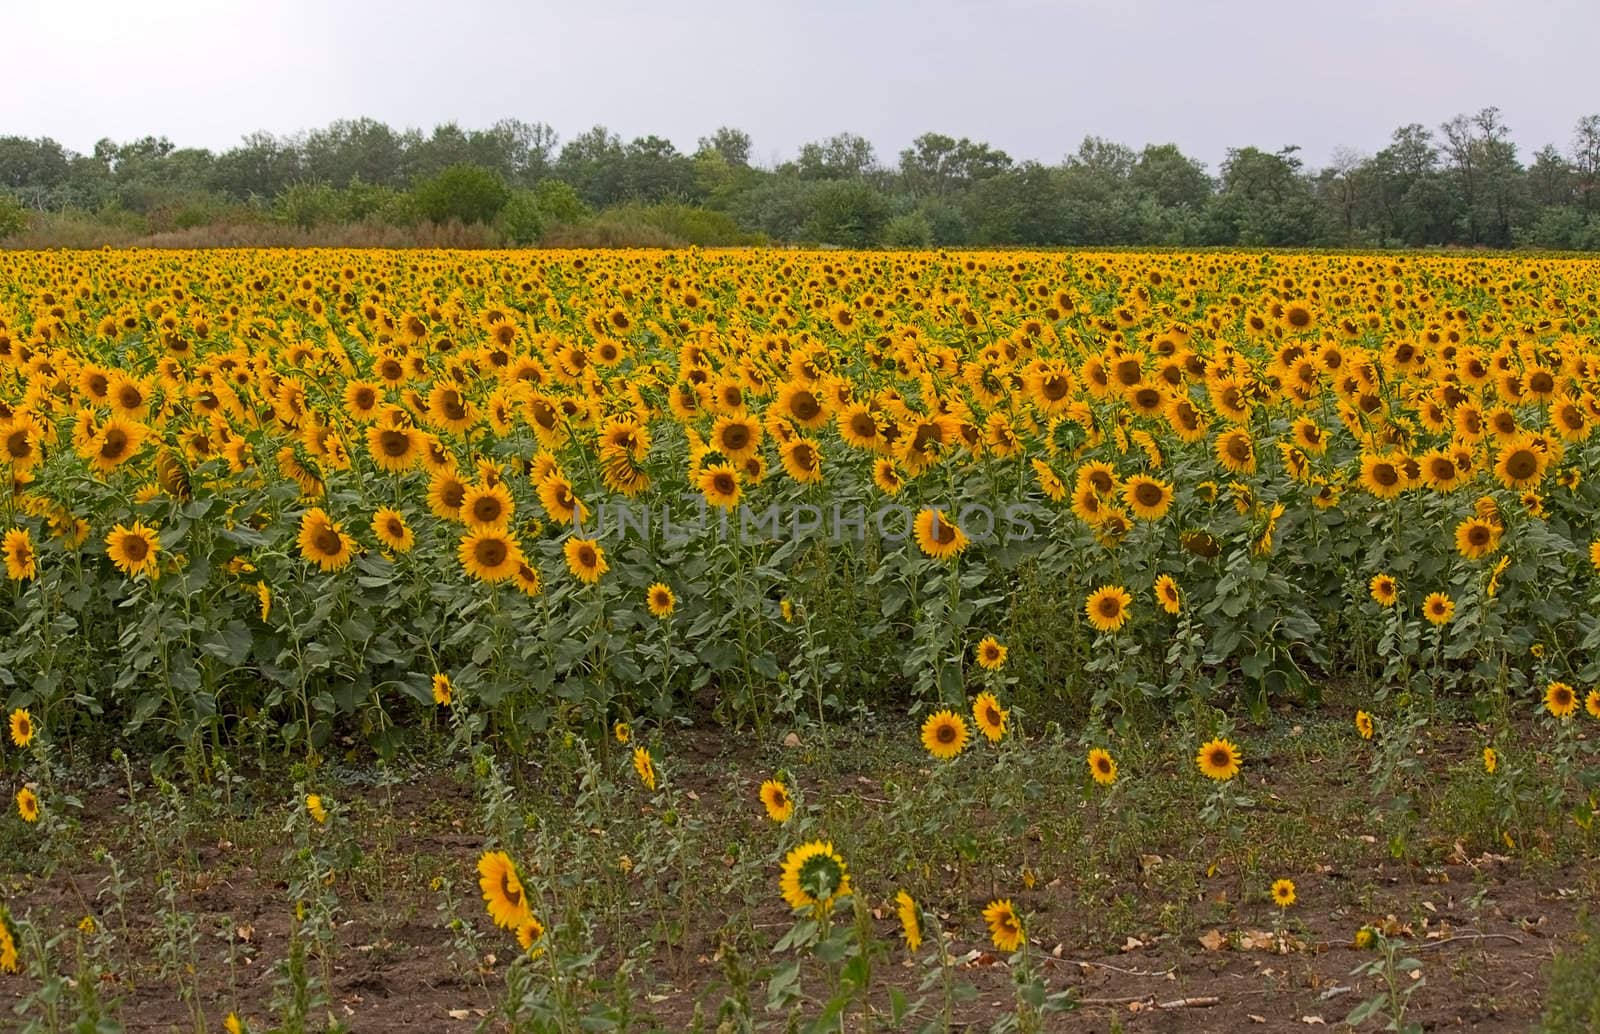 Large field of blooming sunflowers on sky background.